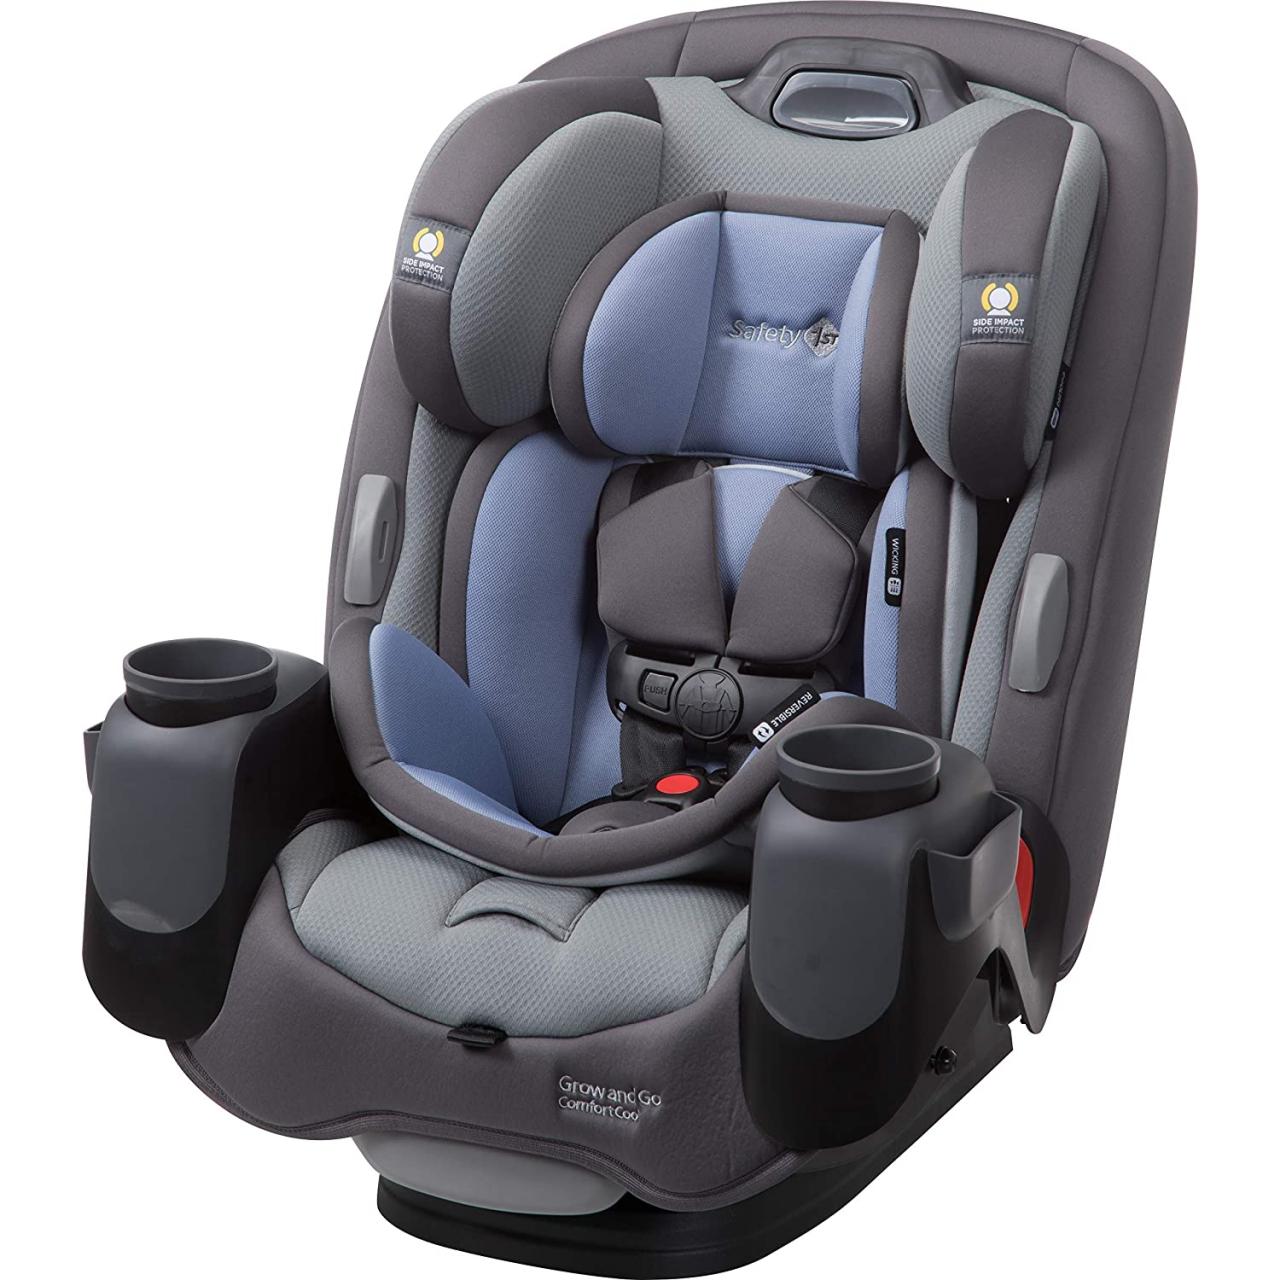 Safety 1st Grow and Go Comfort Cool 3-in-1 Convertible Car Seat, Niagara  Mist